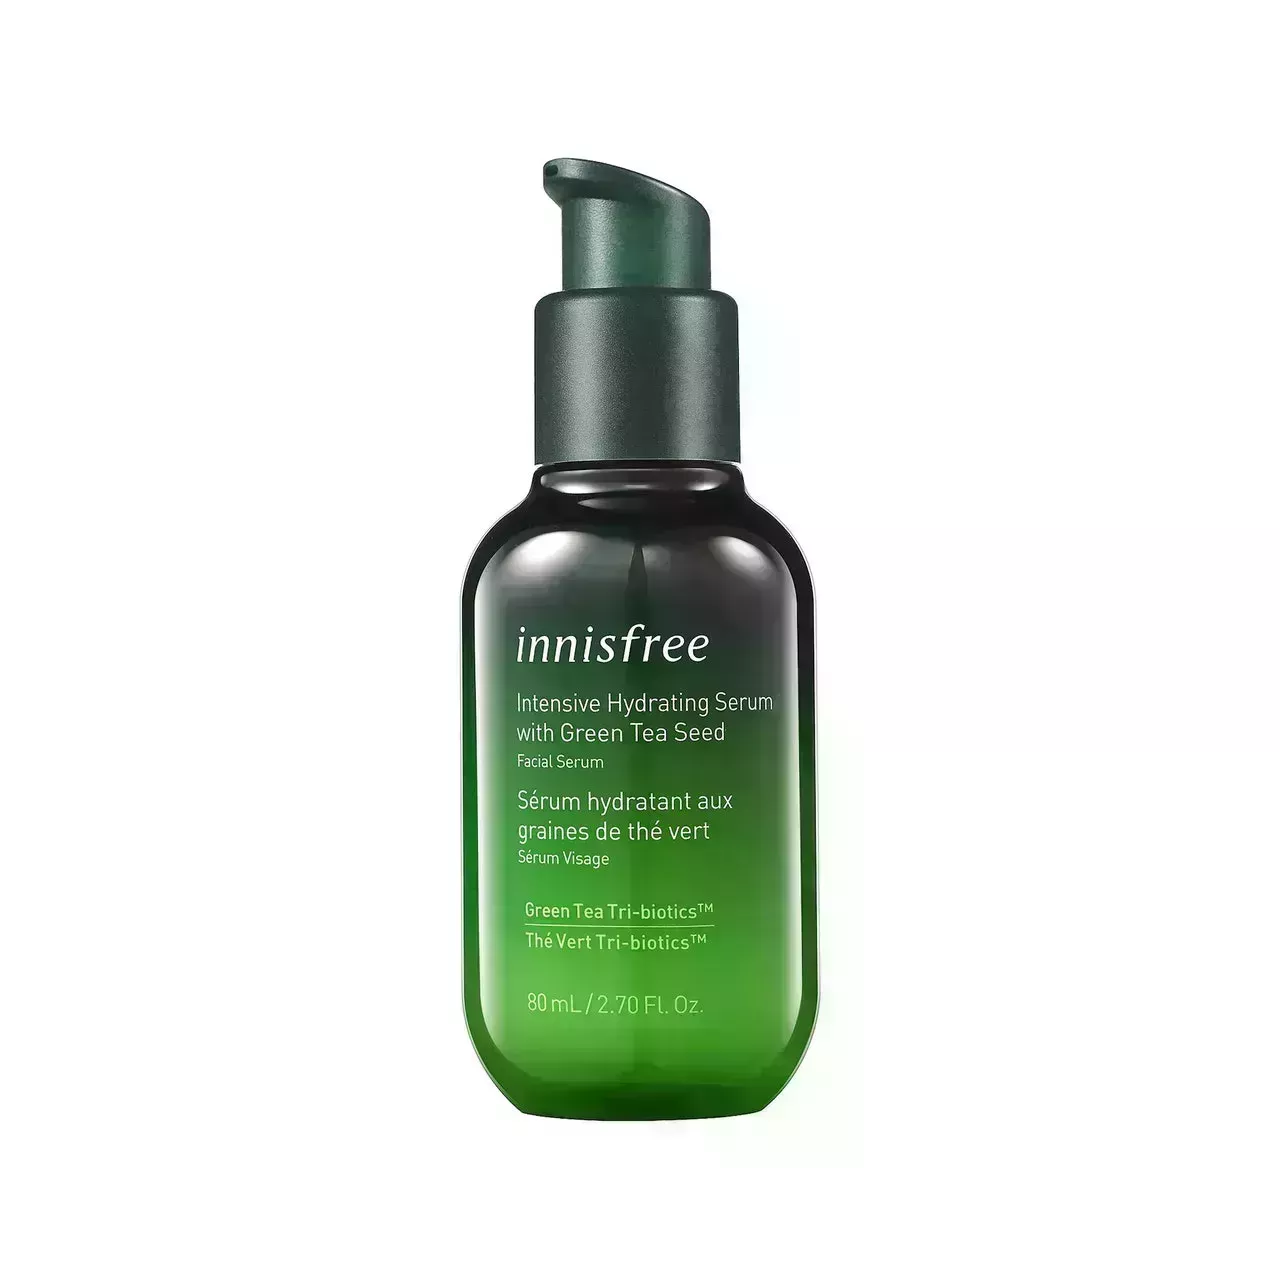 Innisfree Intensive Hydrating Serum with Green Tea Seed green bottle with pump cap on white background